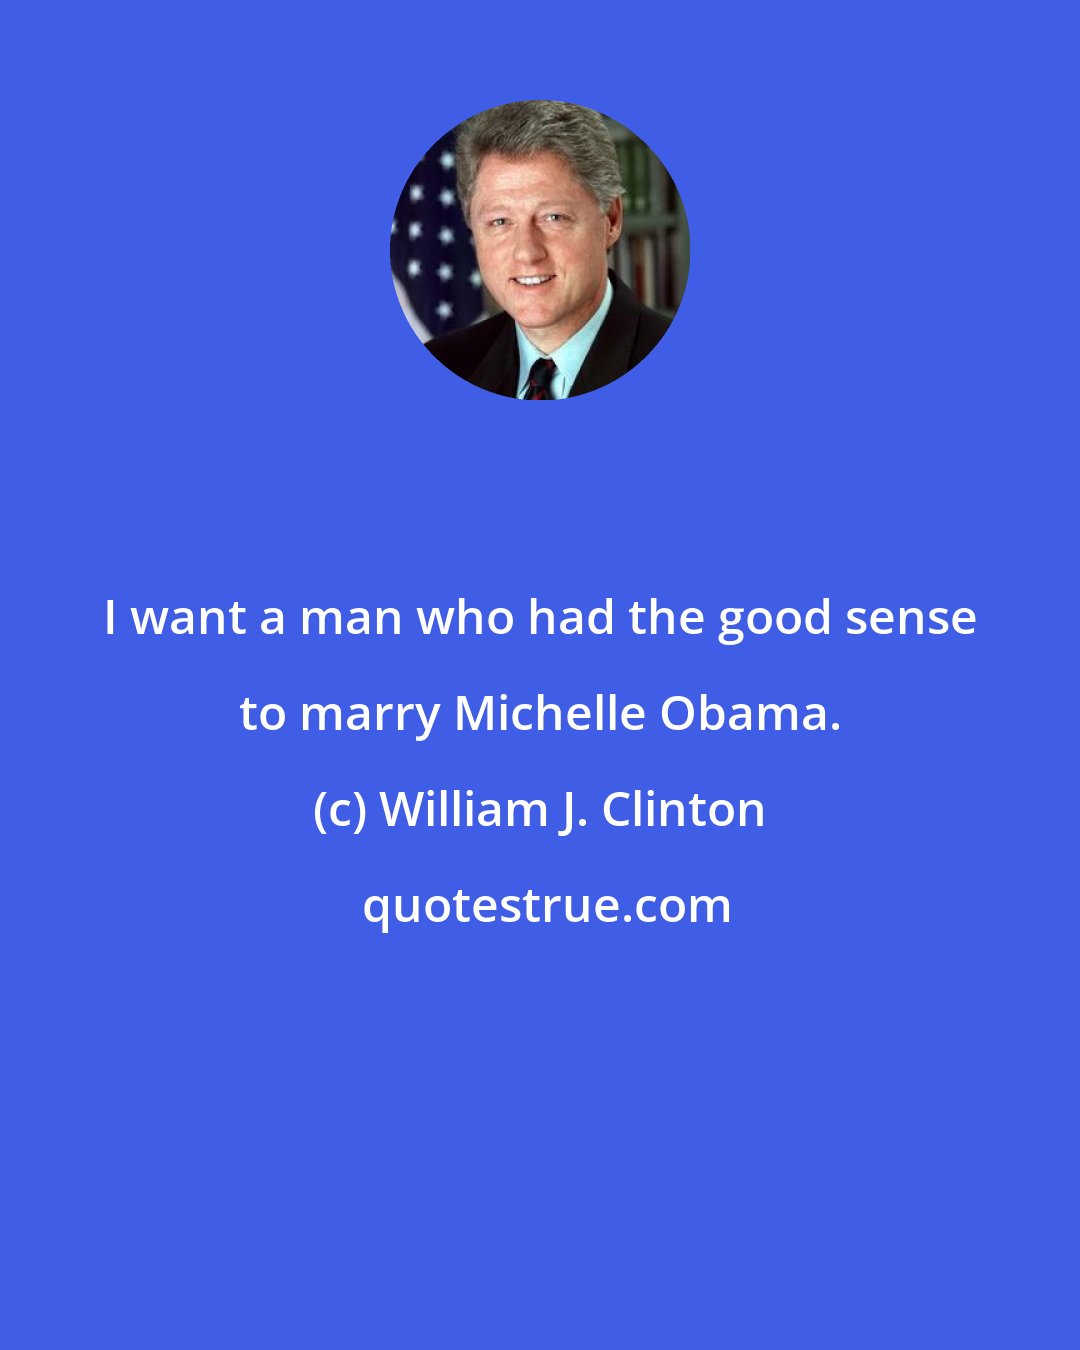 William J. Clinton: I want a man who had the good sense to marry Michelle Obama.